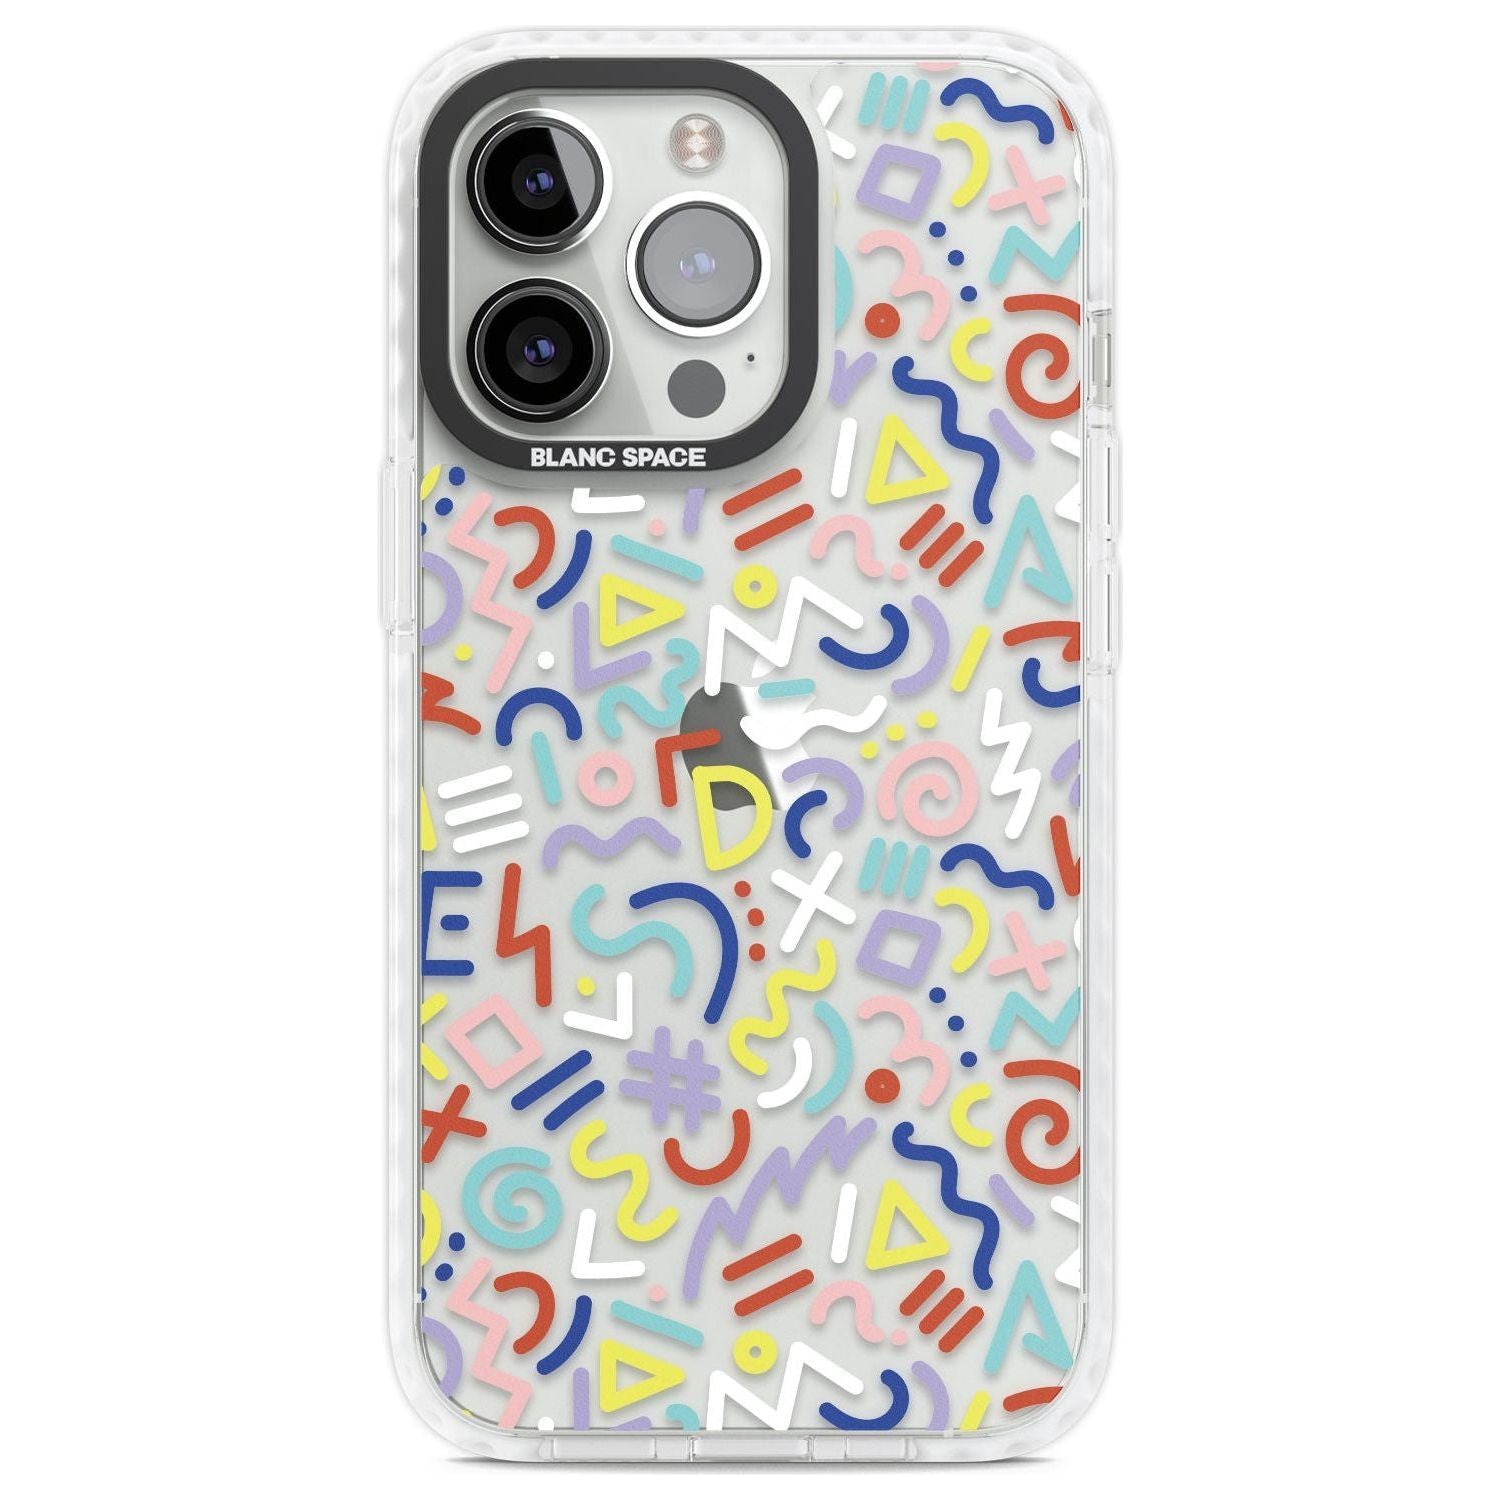 Colourful Mixed Shapes Retro Pattern Design Phone Case iPhone 13 Pro / Impact Case,iPhone 14 Pro / Impact Case,iPhone 15 Pro Max / Impact Case,iPhone 15 Pro / Impact Case Blanc Space